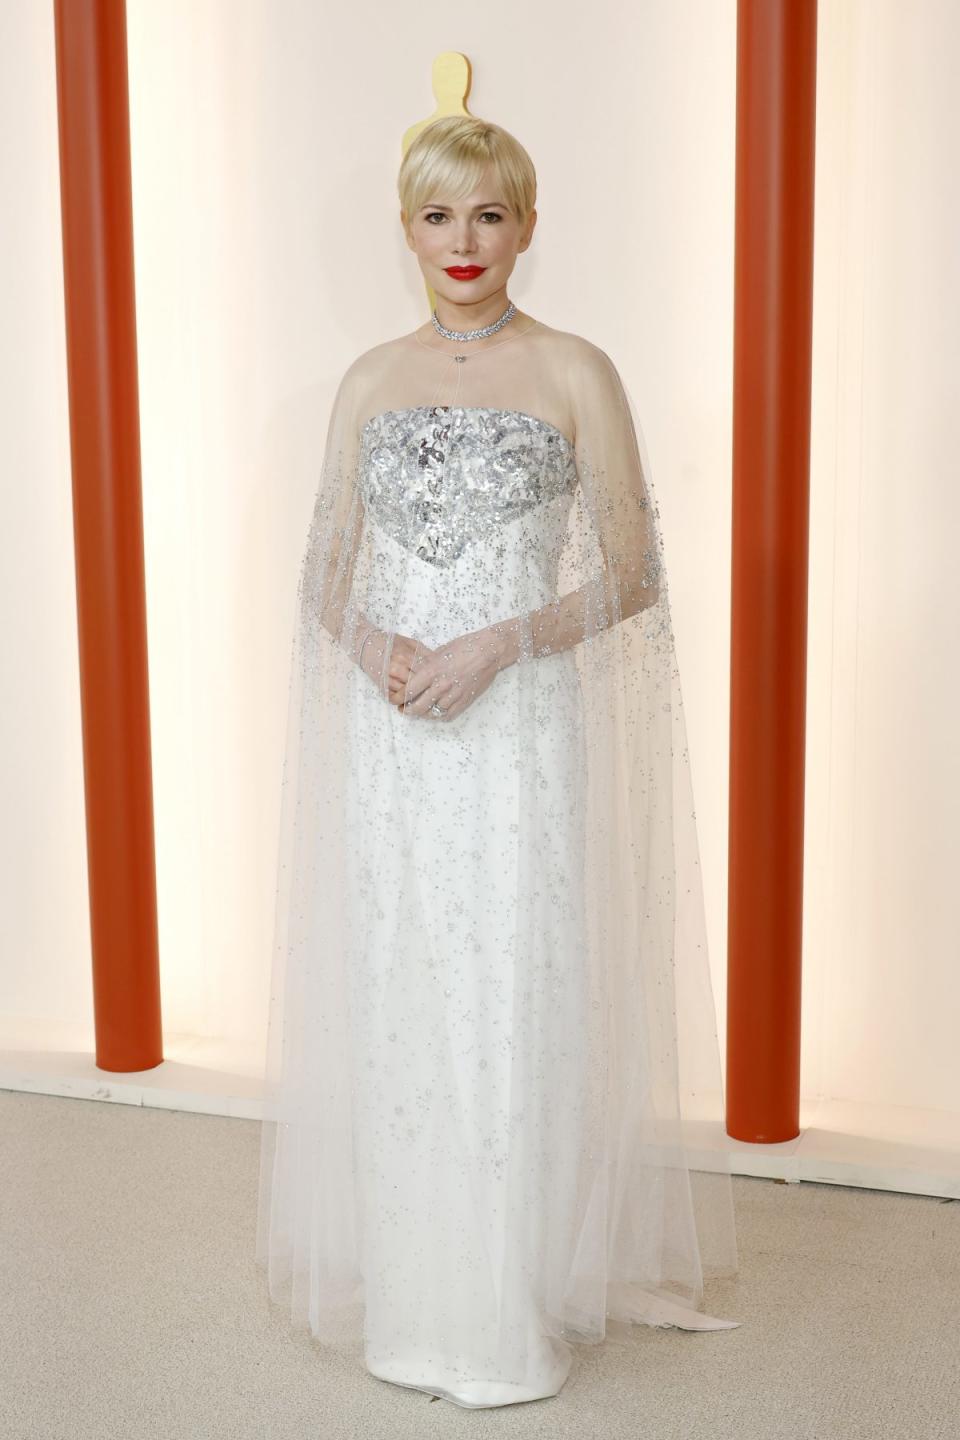 HOLLYWOOD, CALIFORNIA - MARCH 12: Michelle Williams attends the 95th Annual Academy Awards on March 12, 2023 in Hollywood, California. (Photo by Mike Coppola/Getty Images)